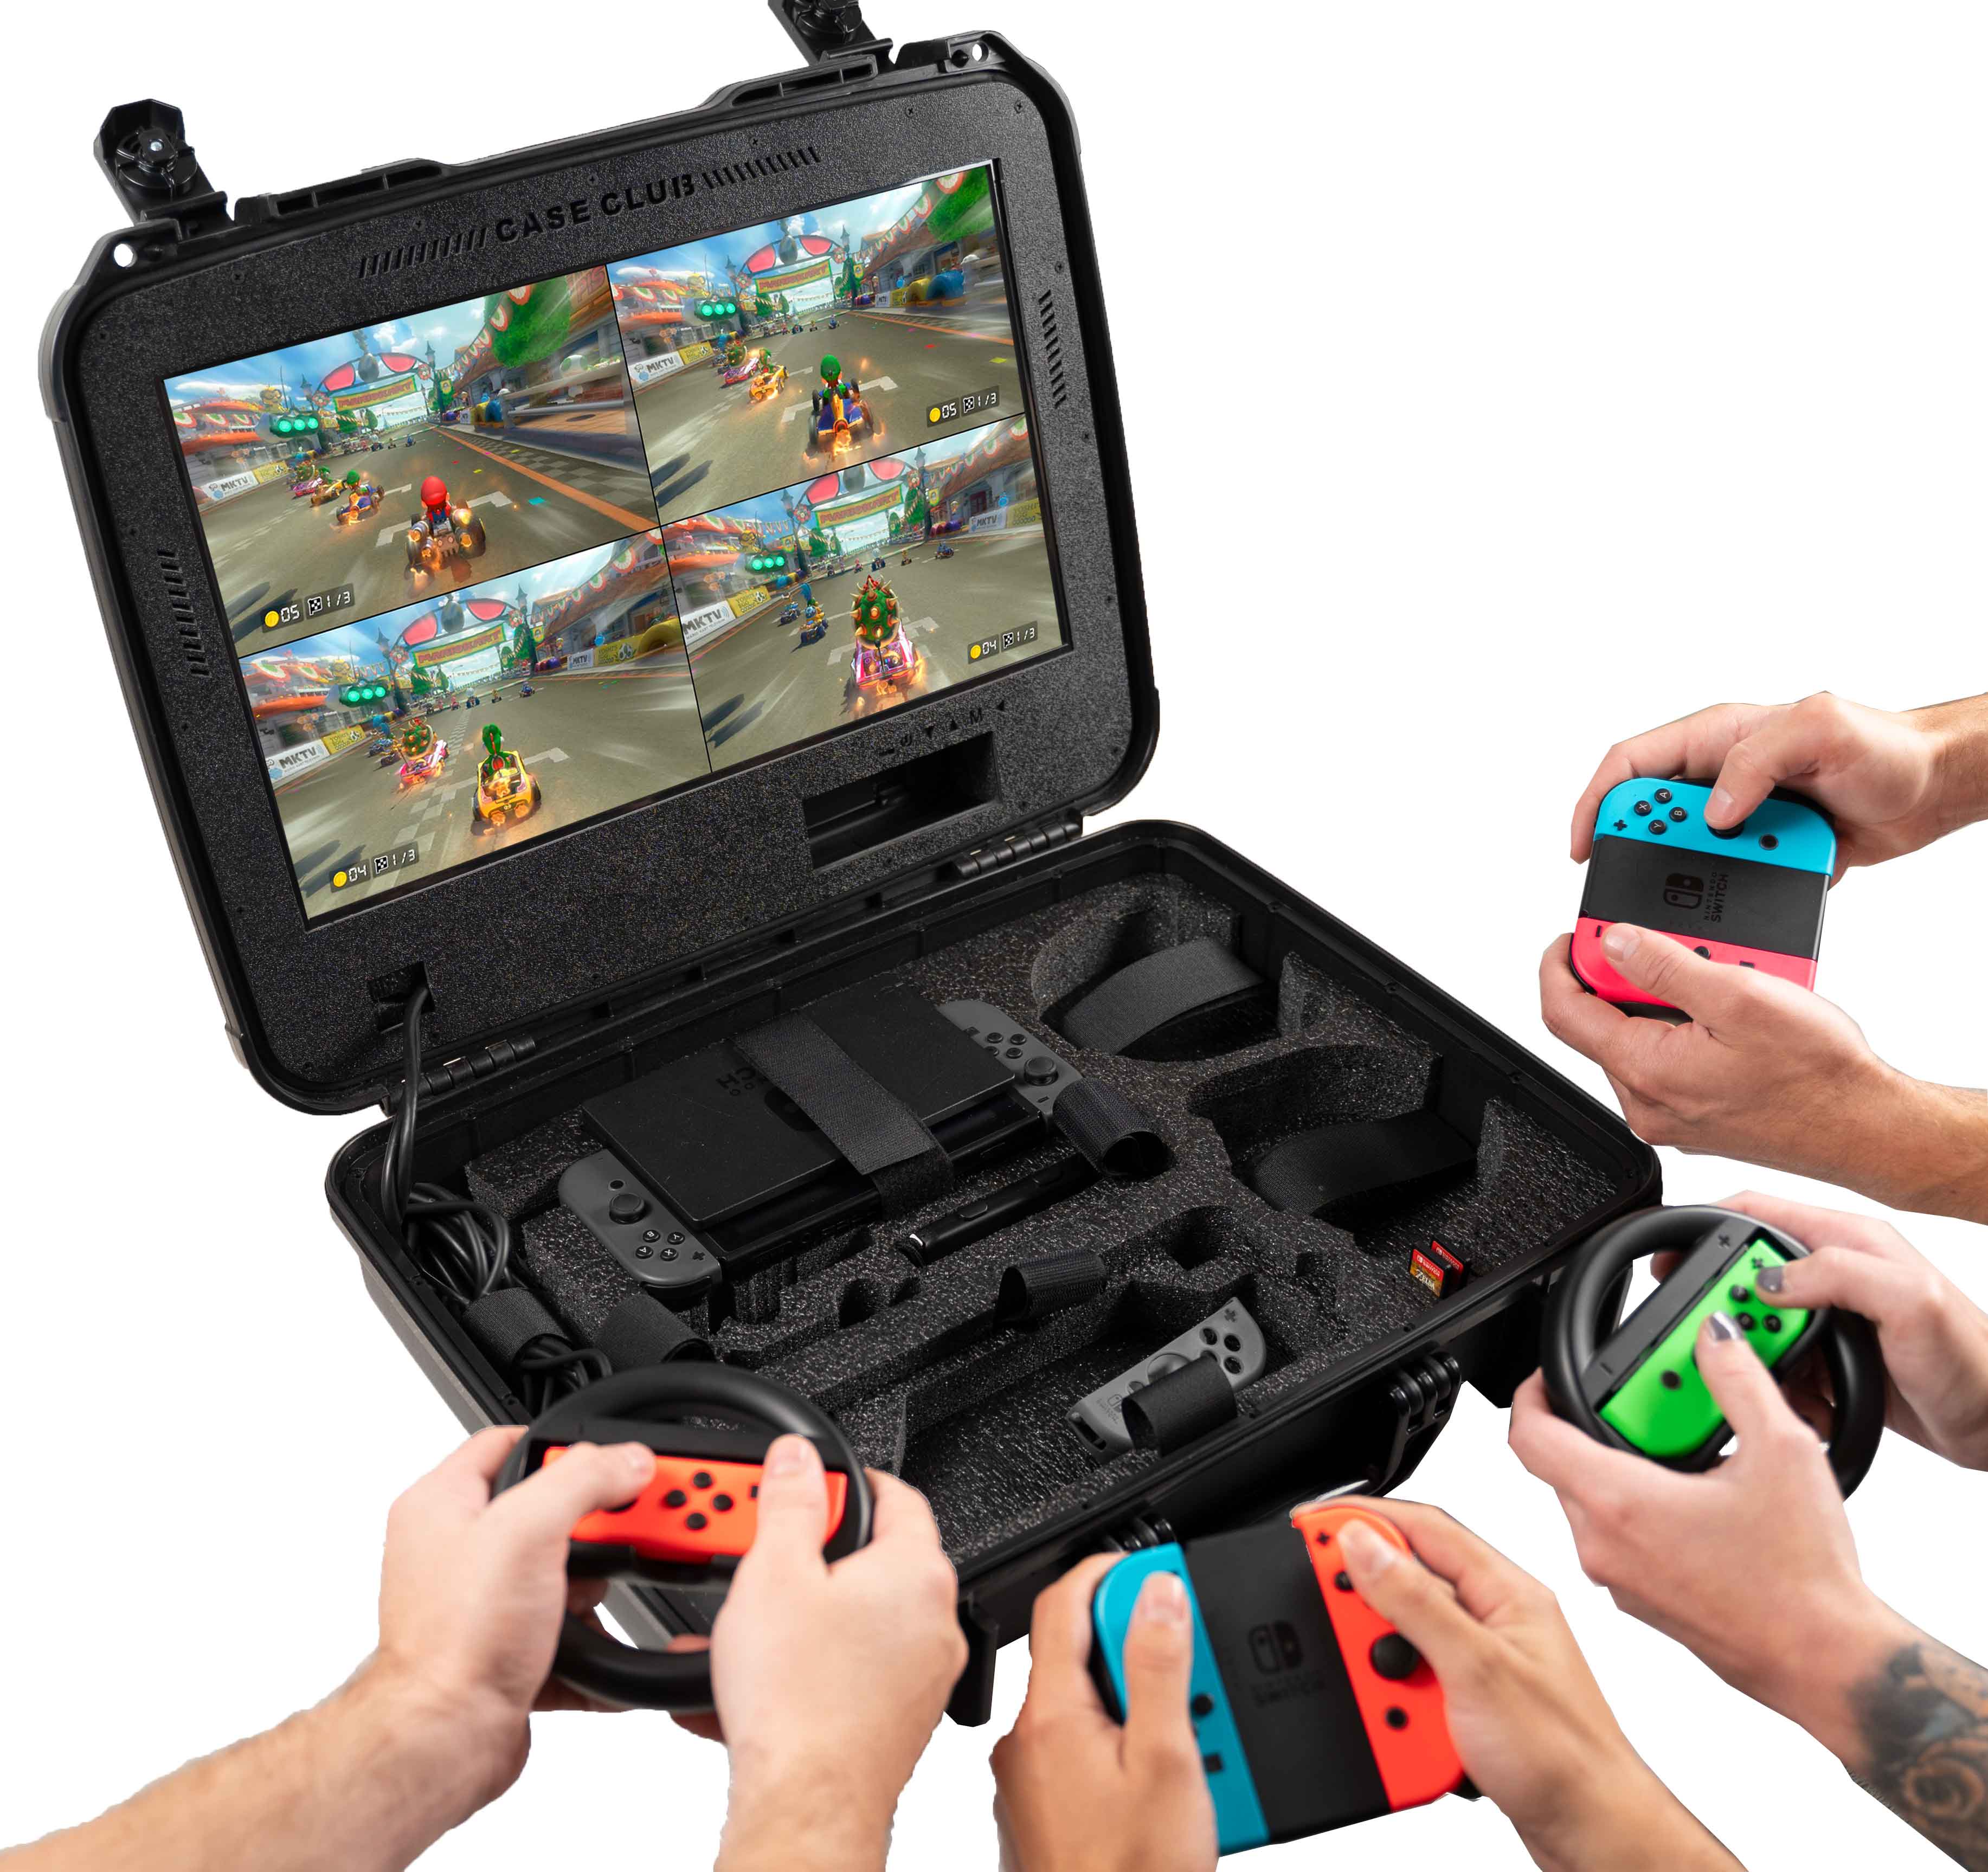 nintendo switch portable gaming system